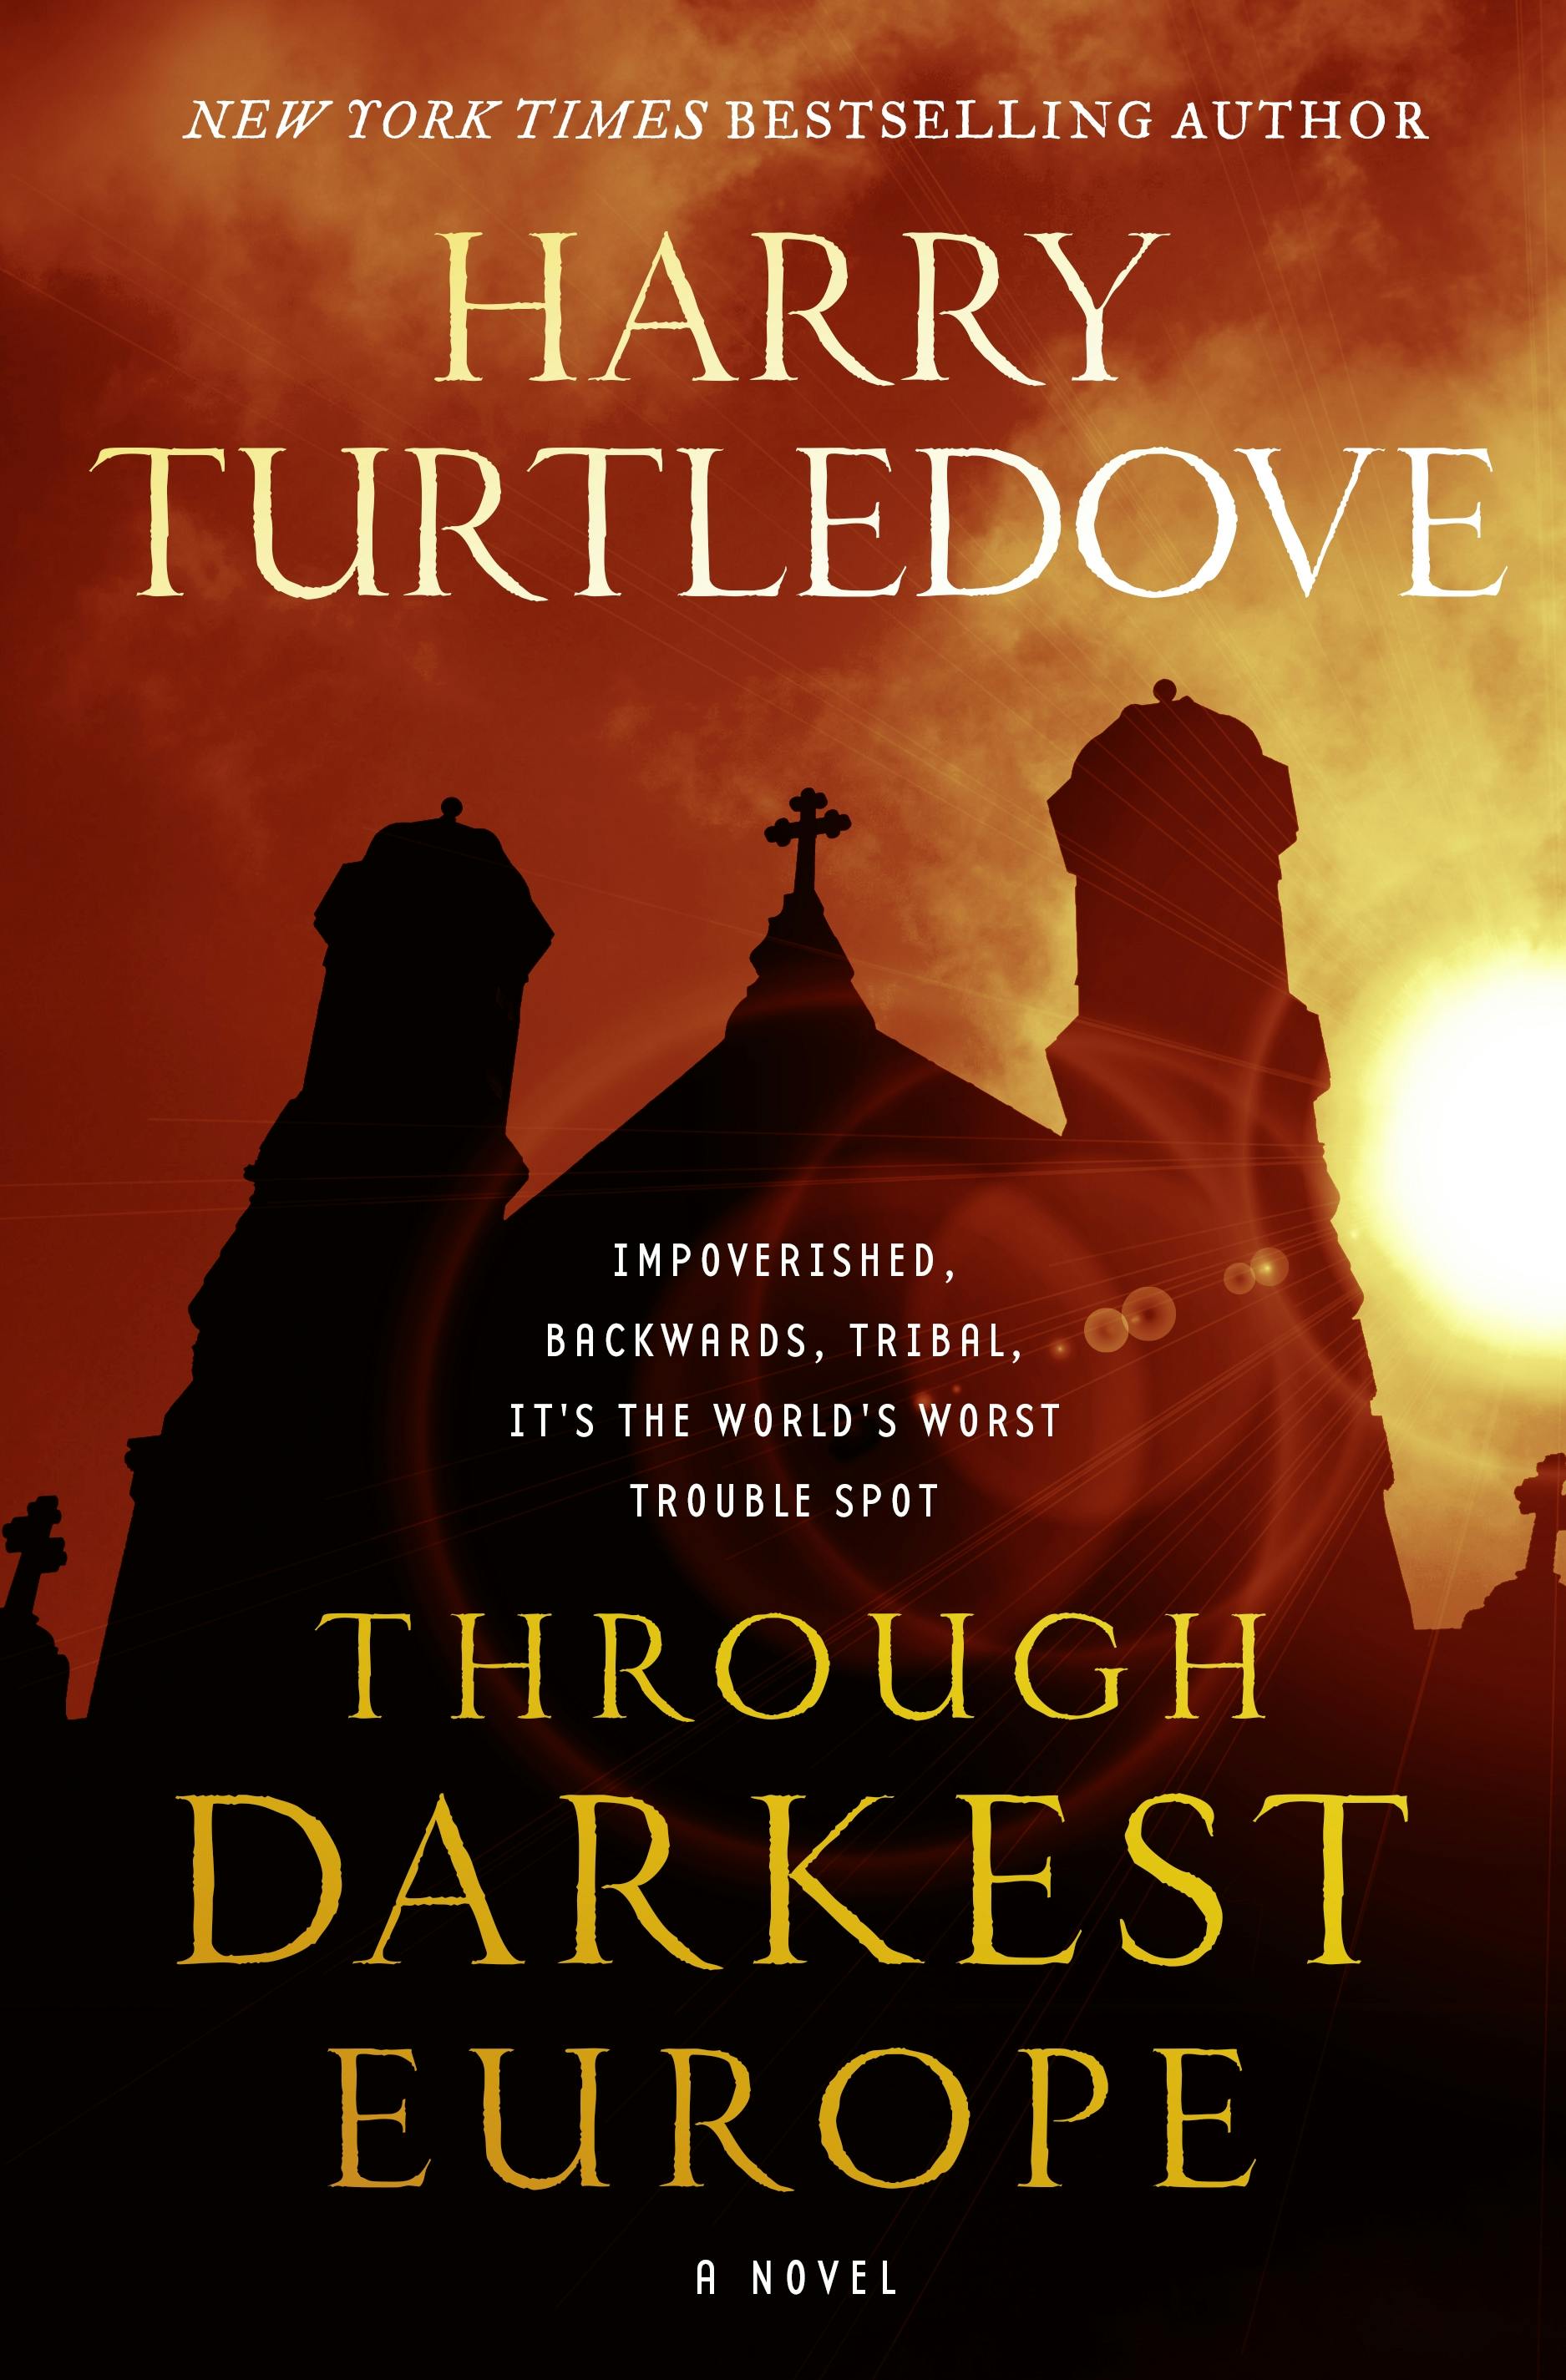 Cover for the book titled as: Through Darkest Europe